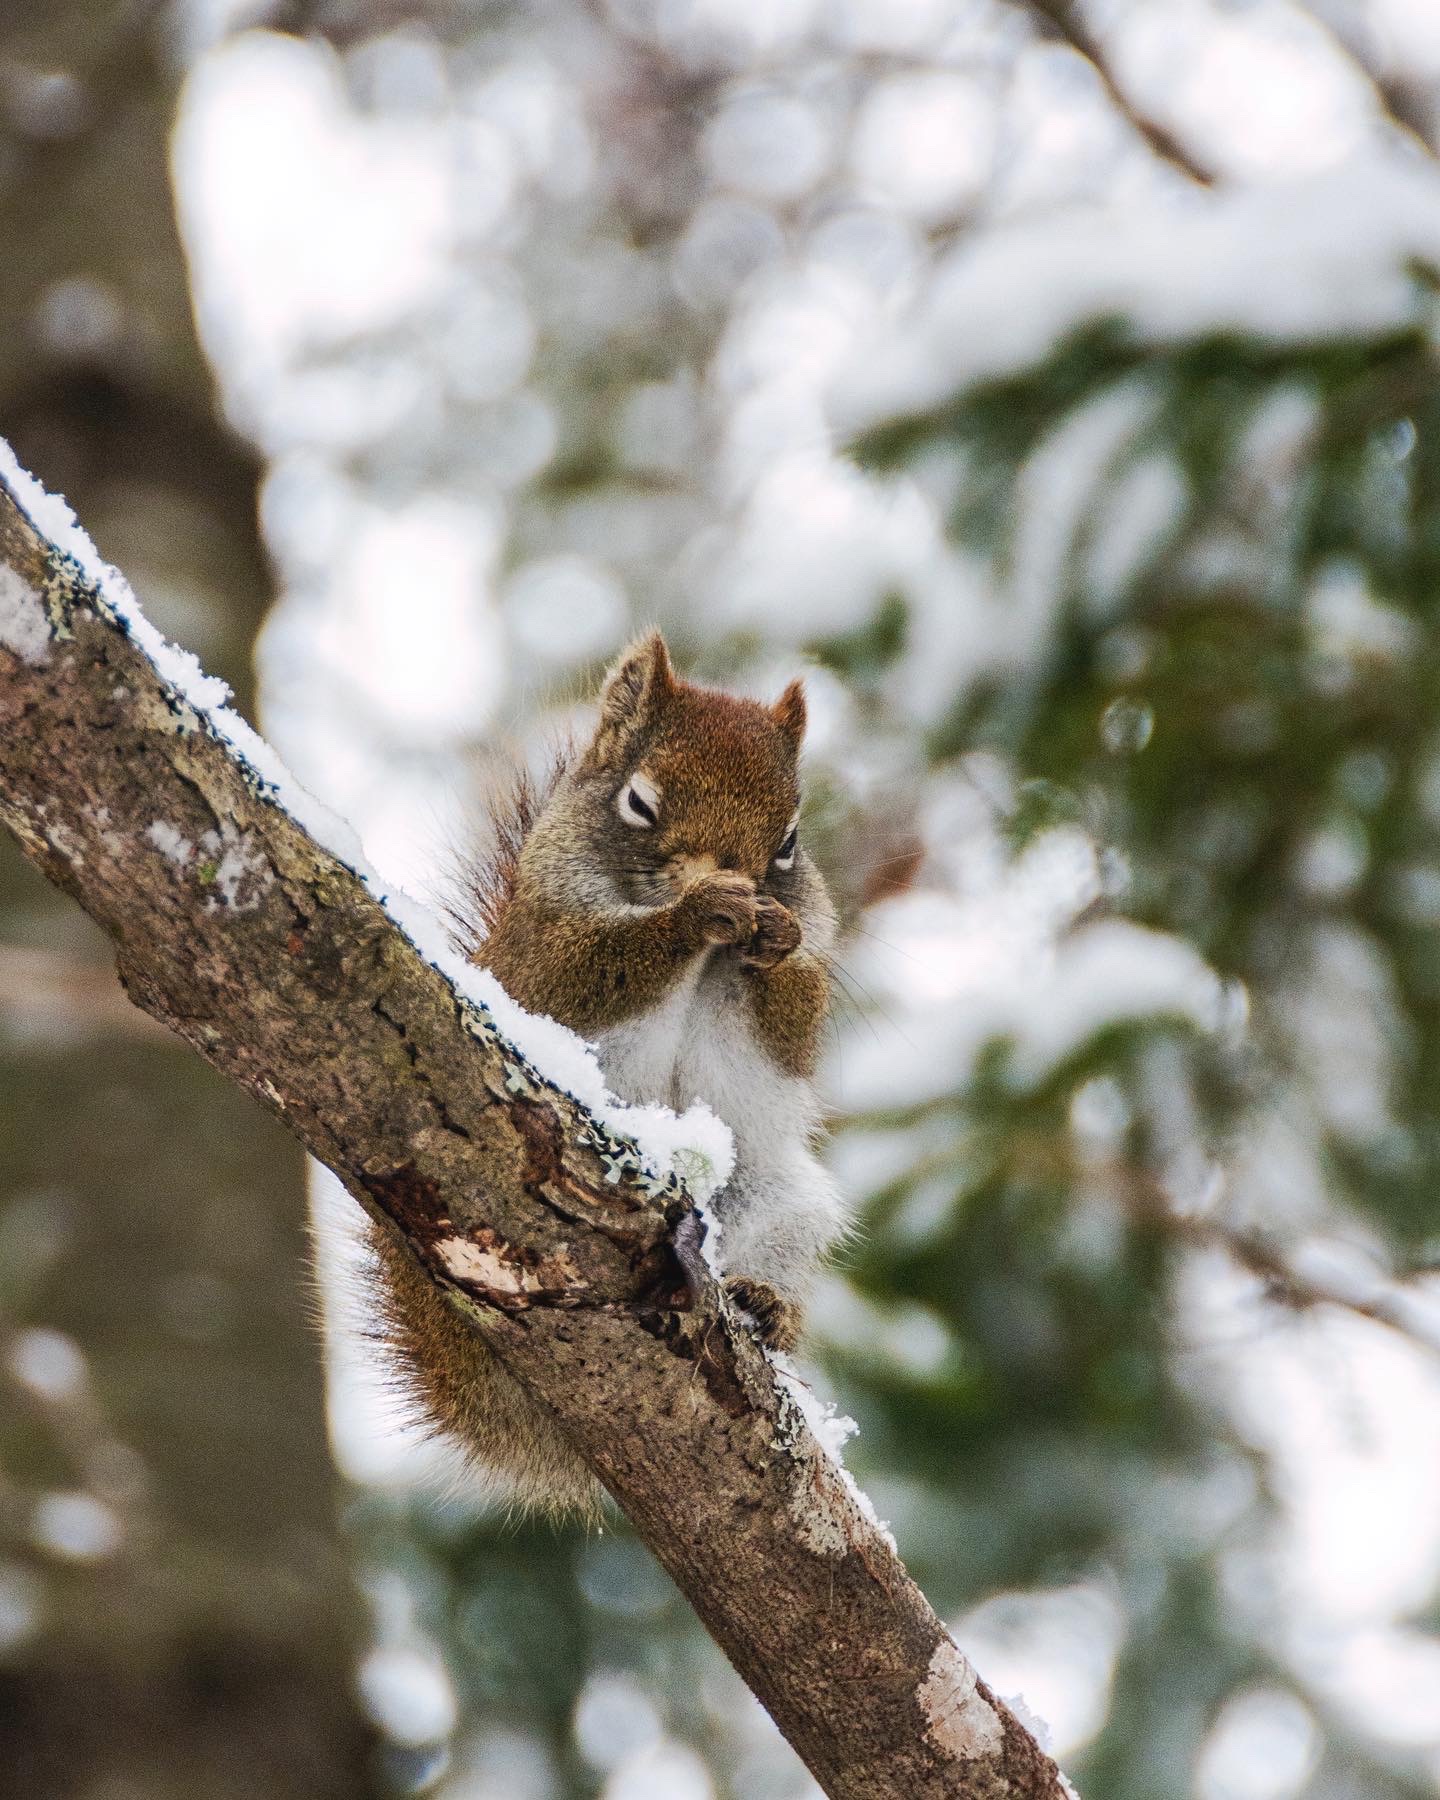 A red squirrel sits on top of a branch and cleans its face. Red squirrels are active in the winter both in the trees and in the subnivean.